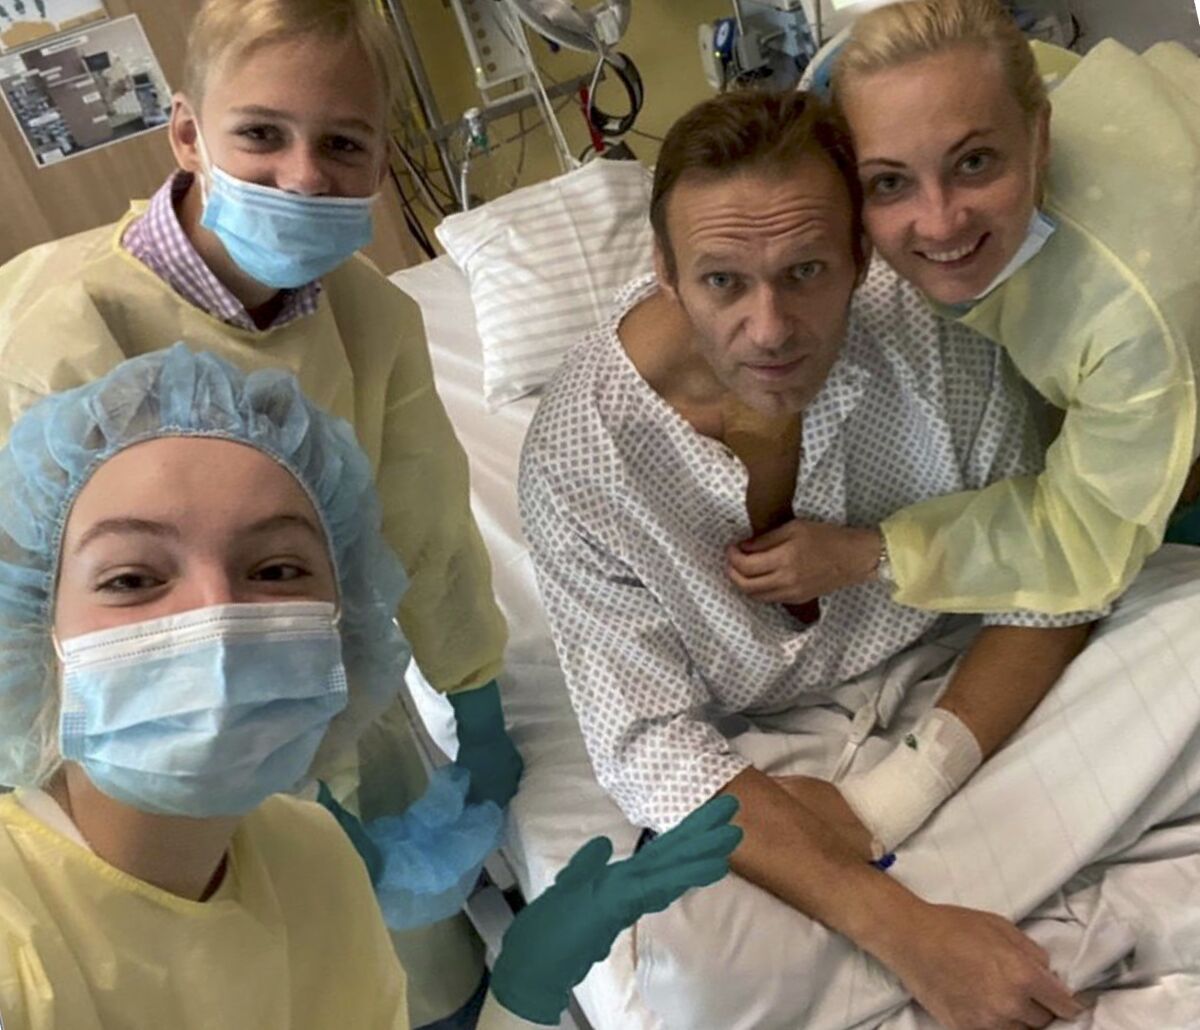 This handout photo published by Russian opposition leader Alexei Navalny on his instagram account, shows himself, centre, and his wife Yulia, right, posing for a photo with medical workers in a hospital hospital in Berlin, Germany. Russian opposition leader Alexei Navalny has posted the picture of himself in a hospital in Germany and says he's breathing on his own. He posted on Instagram Tuesday Sept. 15, 2020: "Hi, this is Navalny. I have been missing you. I still can't do much, but yesterday I managed to breathe on my own for the entire day." (Navalny instagram via AP)